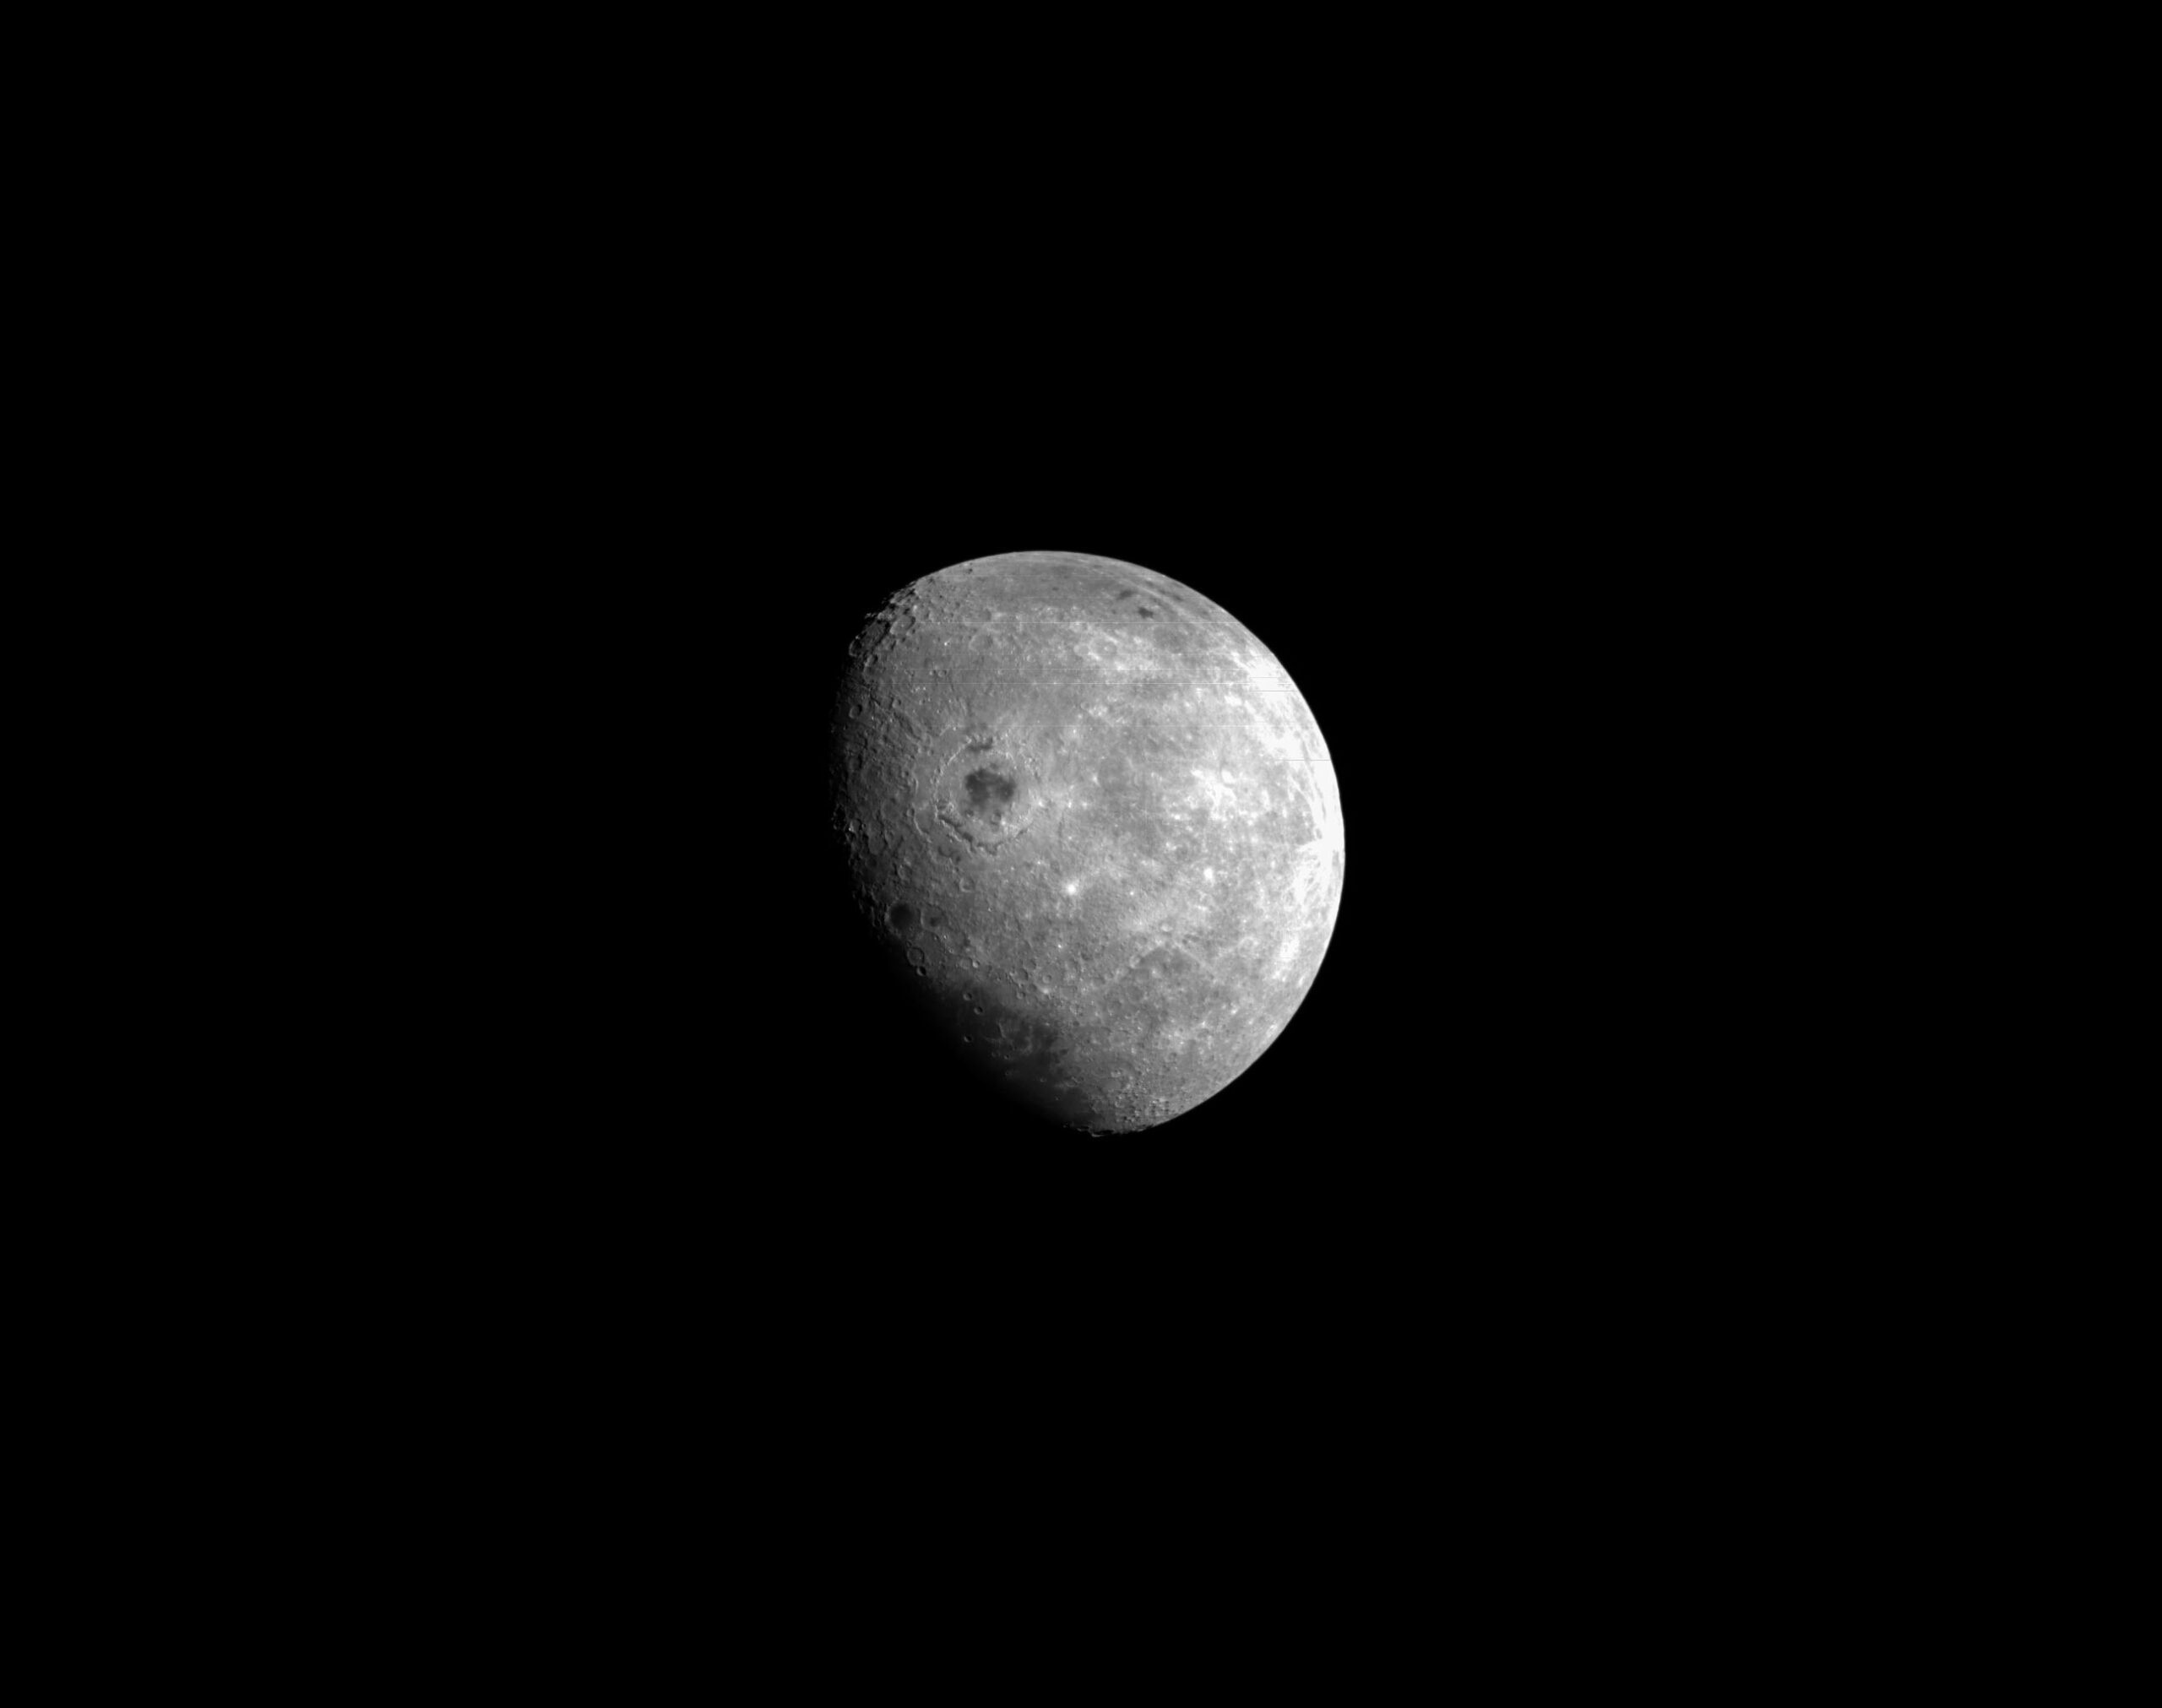 image of moon from orion spacecraft